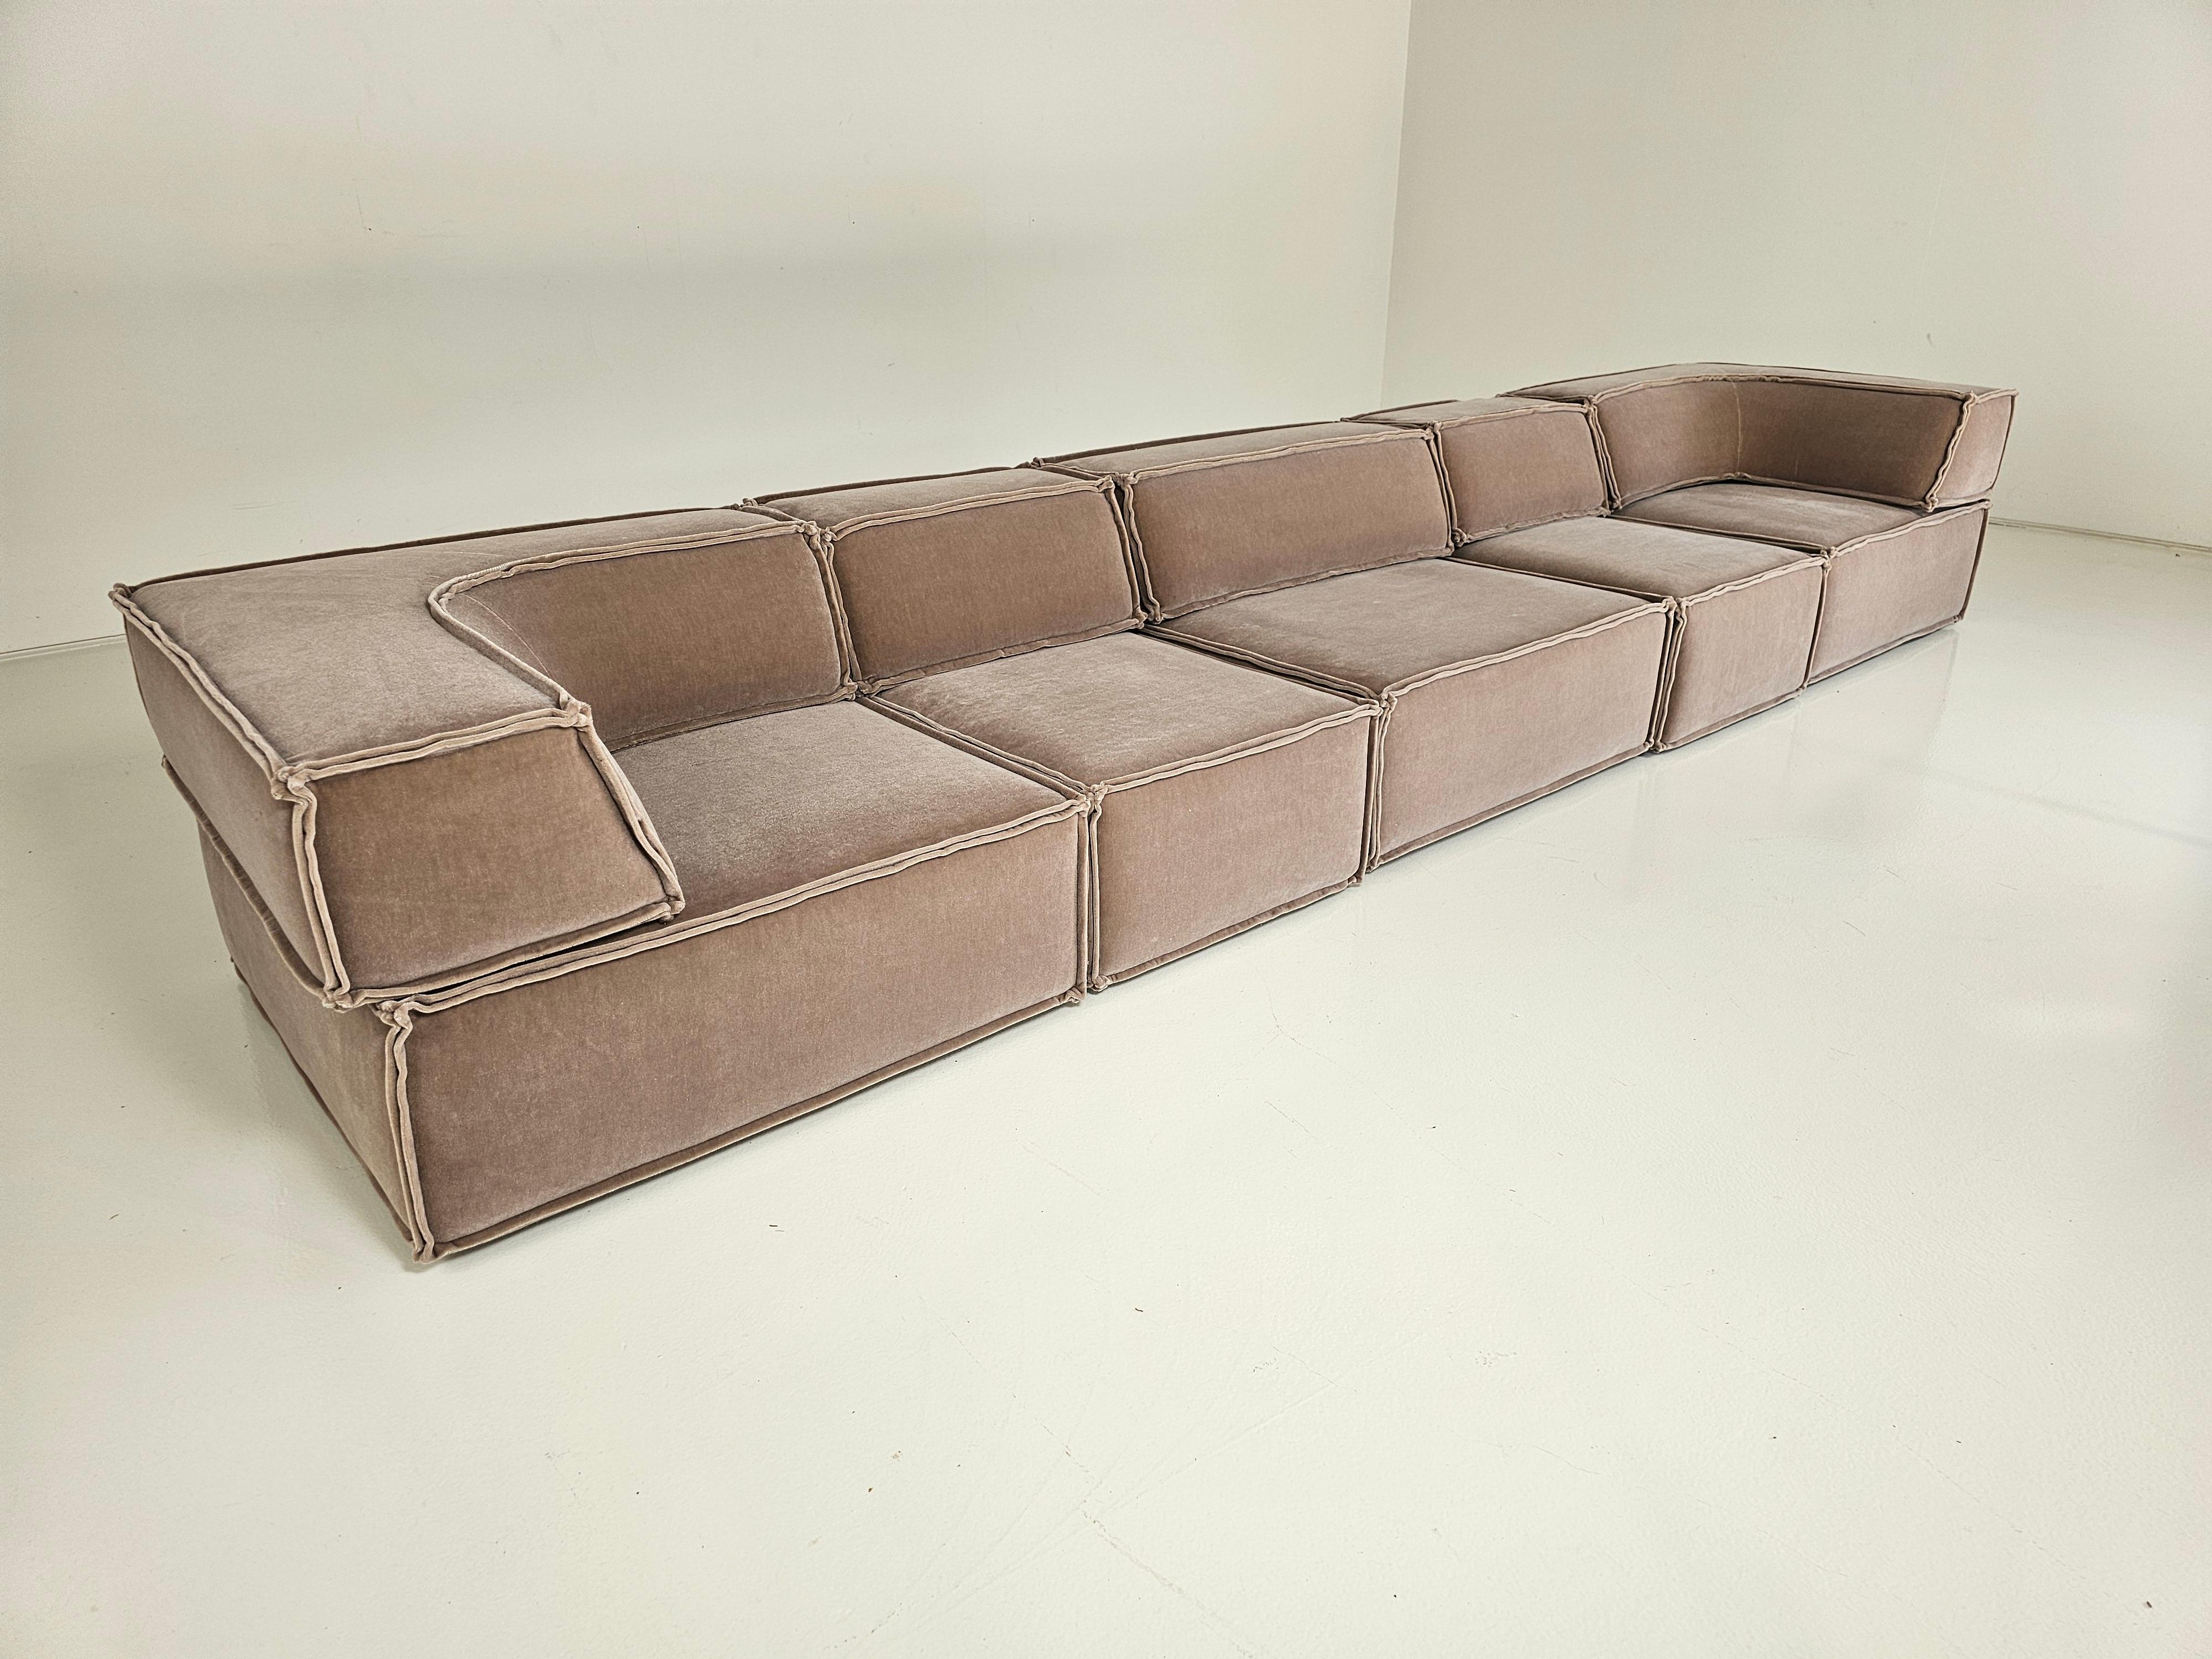 European COR Trio Sofa in beige mohair by Team Form Ag for COR Furniture, Germany, 1970s For Sale